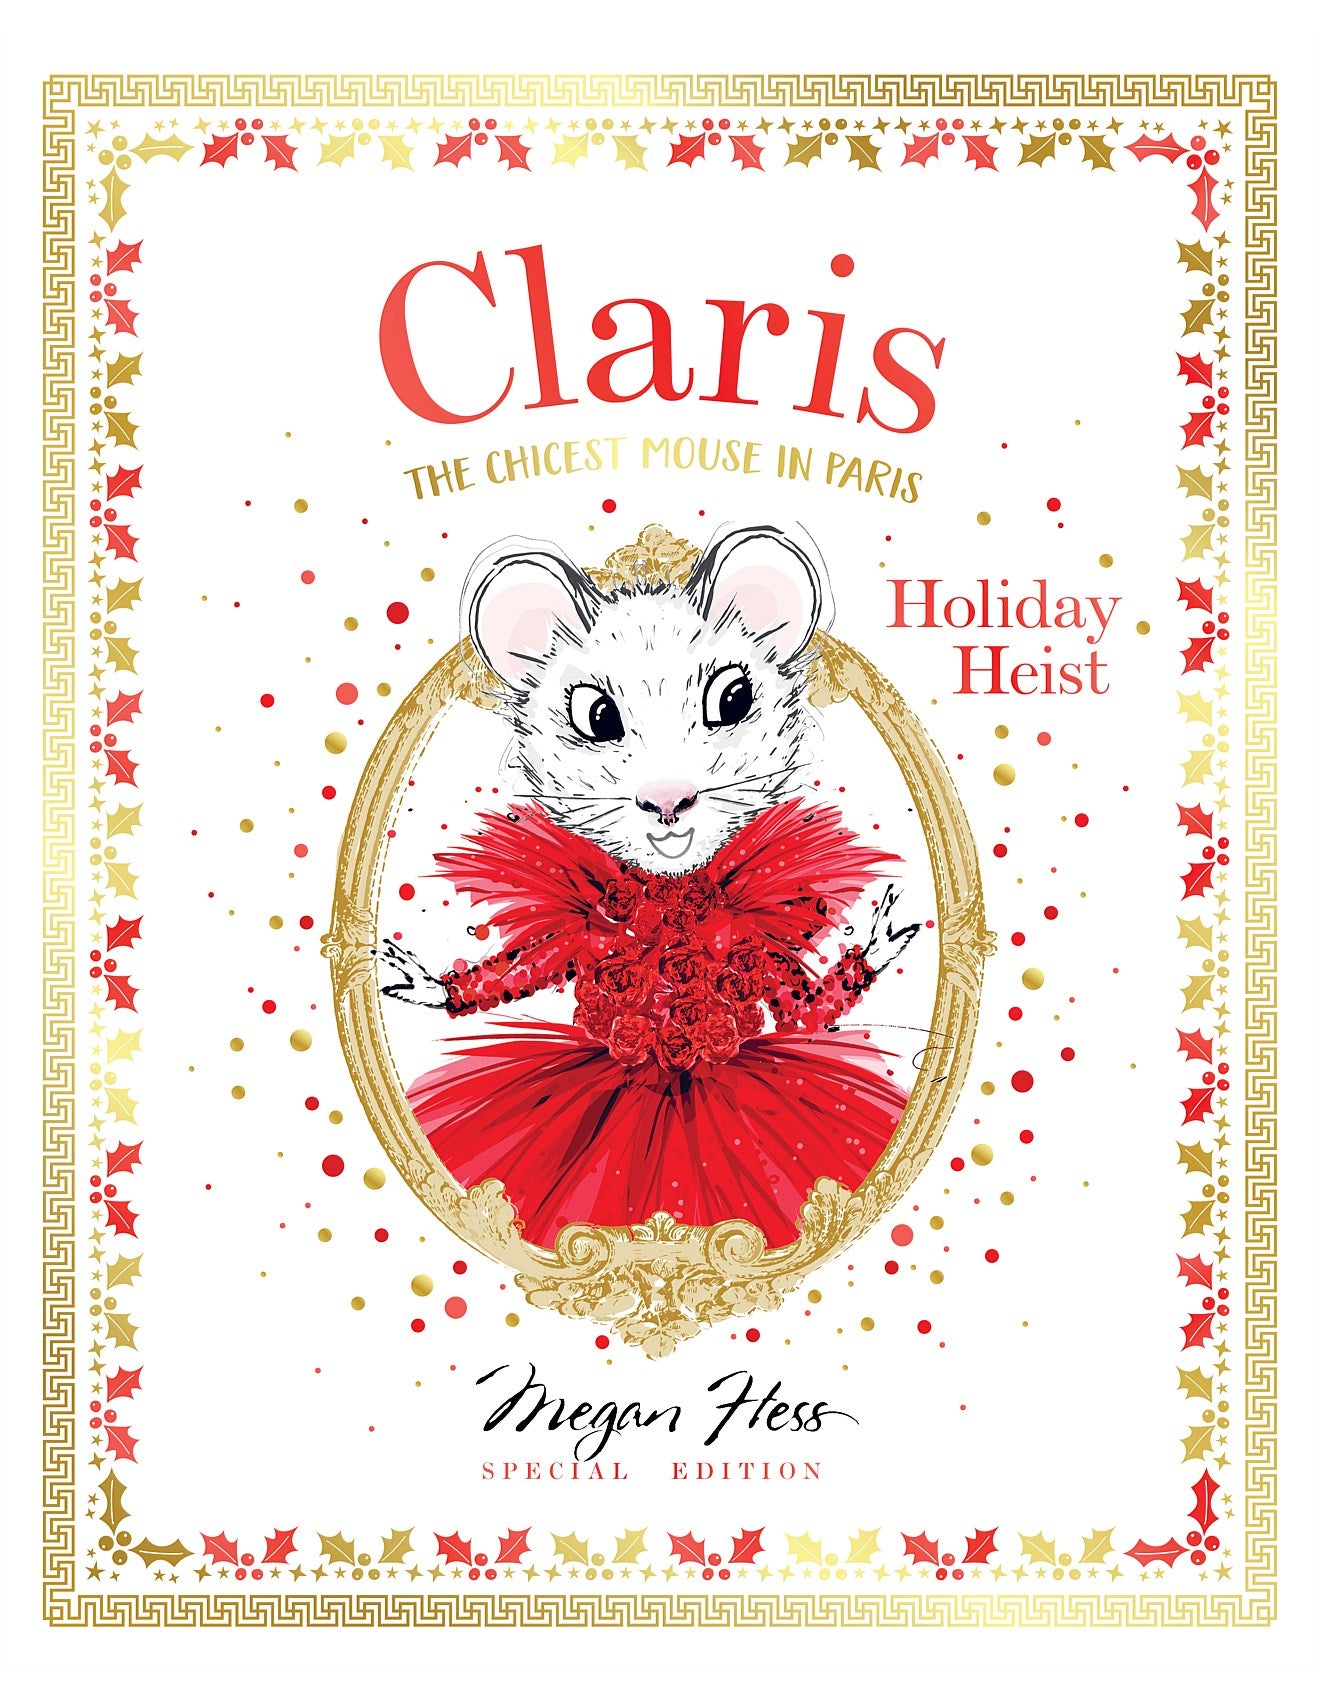 Claris the Chicest Mouse in Paris - Holiday Heist By Megan Hess